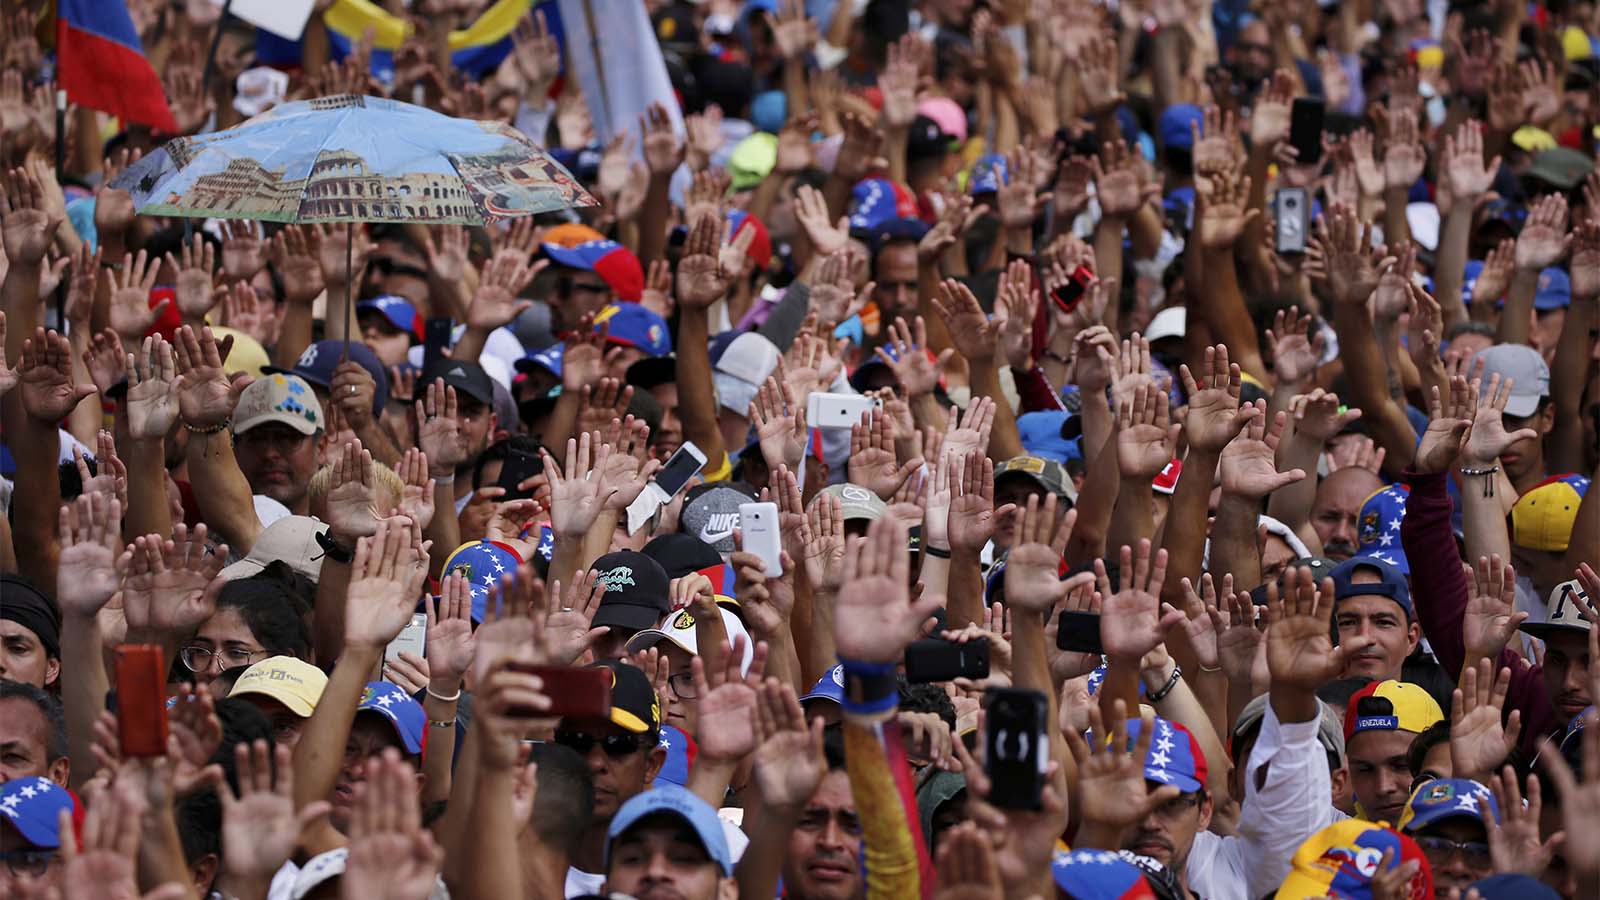 Anti-government protesters hold their hands up during the symbolic swearing-in of Juan Guaido, head of the opposition-run congress, who declared himself interim president of Venezuela, during a rally demanding President Nicolas Maduro's resignation in Caracas, Venezuela, Wednesday, Jan. 23, 2019. (AP Photo/Fernando Llano)